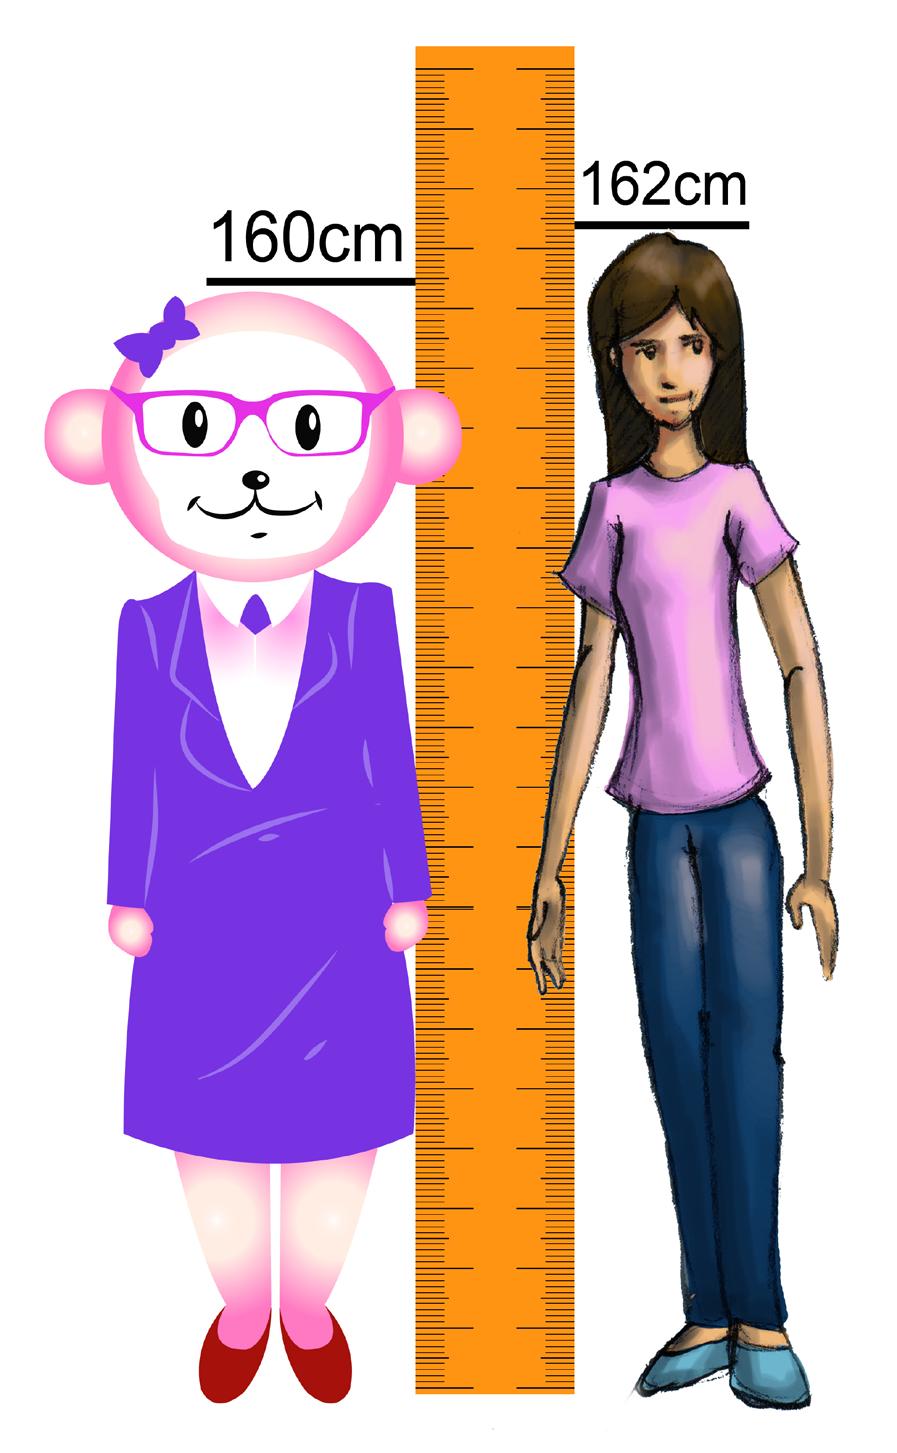 Unit Twenty-One Q-ty is almost as tall as Jane. Target Language Q-ty is almost as tall as Jane. The tallest U.S.